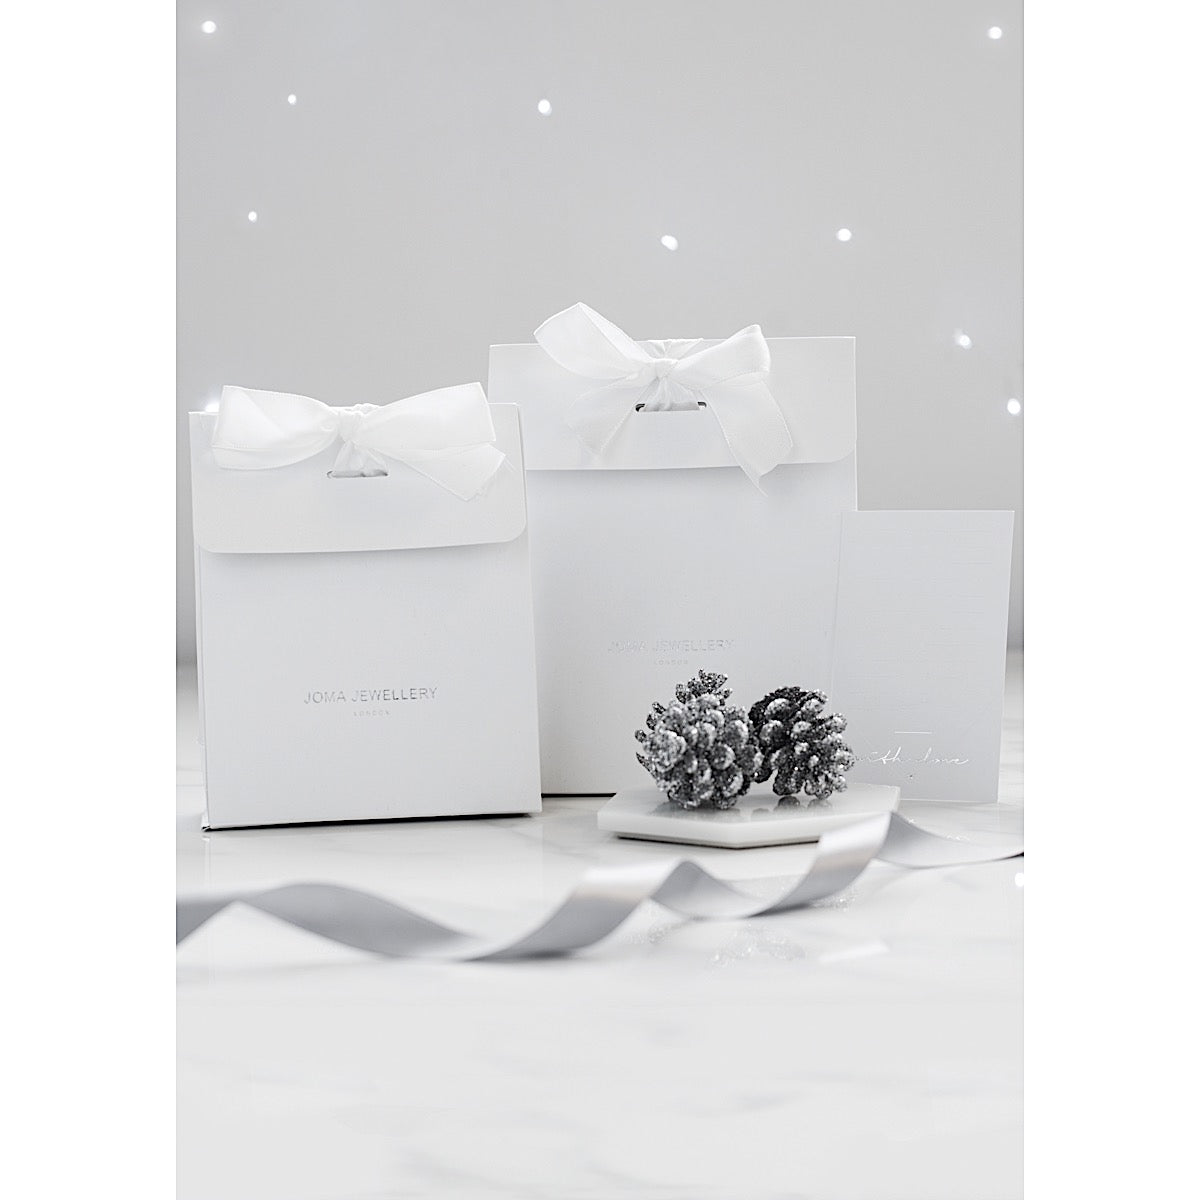 Joma Jewellery AW18 Gift Bags - More Than Just a Gift